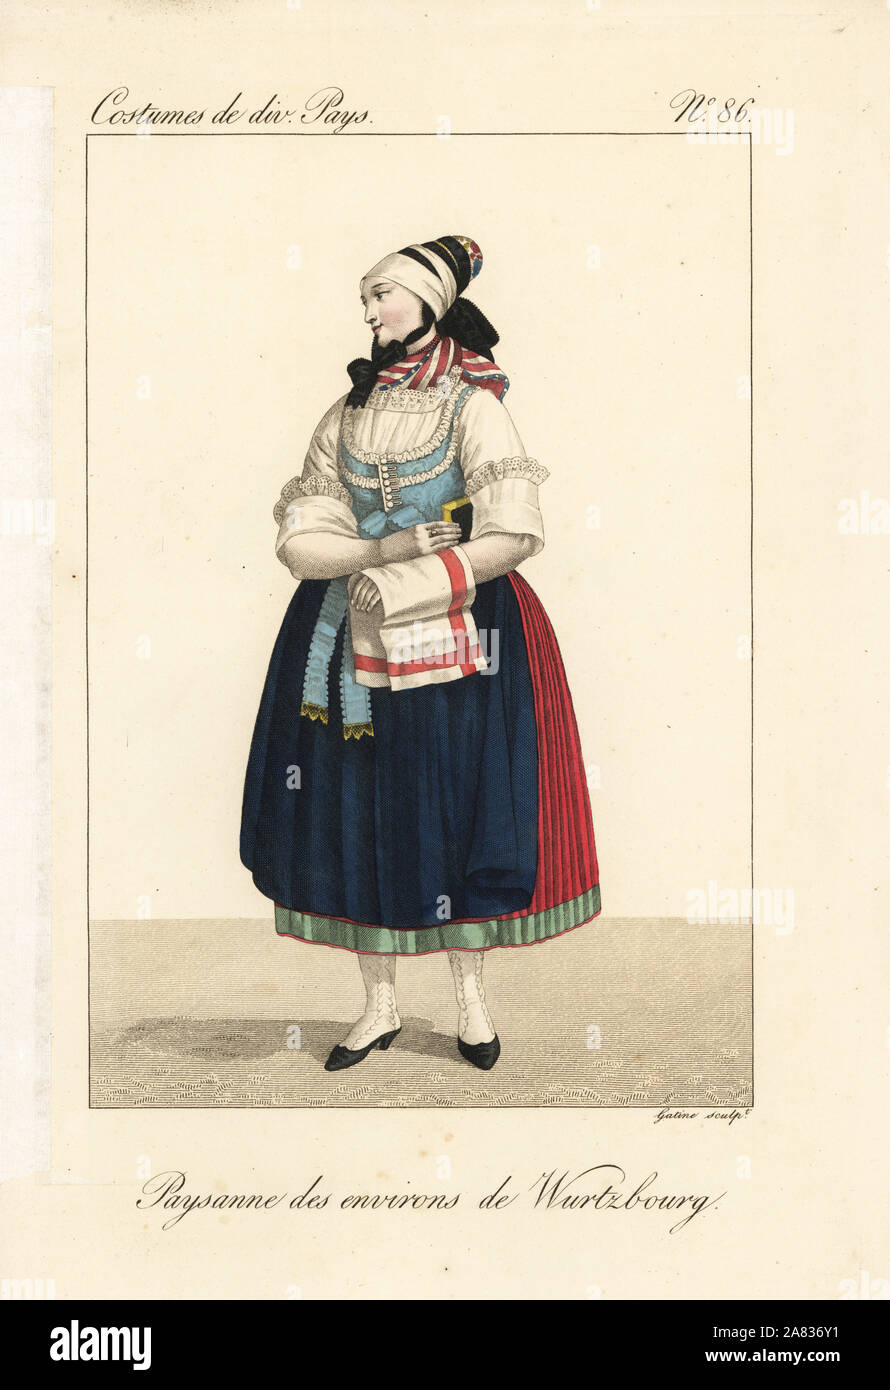 Peasant girl of the environs of Wurtzburg, Franconia, Germany, 19th century. The headband covers the elegance of the bonnet, and the fichu is bunched up around the throat. She wears an apron over pleated petticoats. Handcoloured copperplate engraving by Georges Jacques Gatine after an illustration by Louis Marie Lante from Costumes of Various Countries, Costumes de Divers Pays, Paris, 1827. Stock Photo